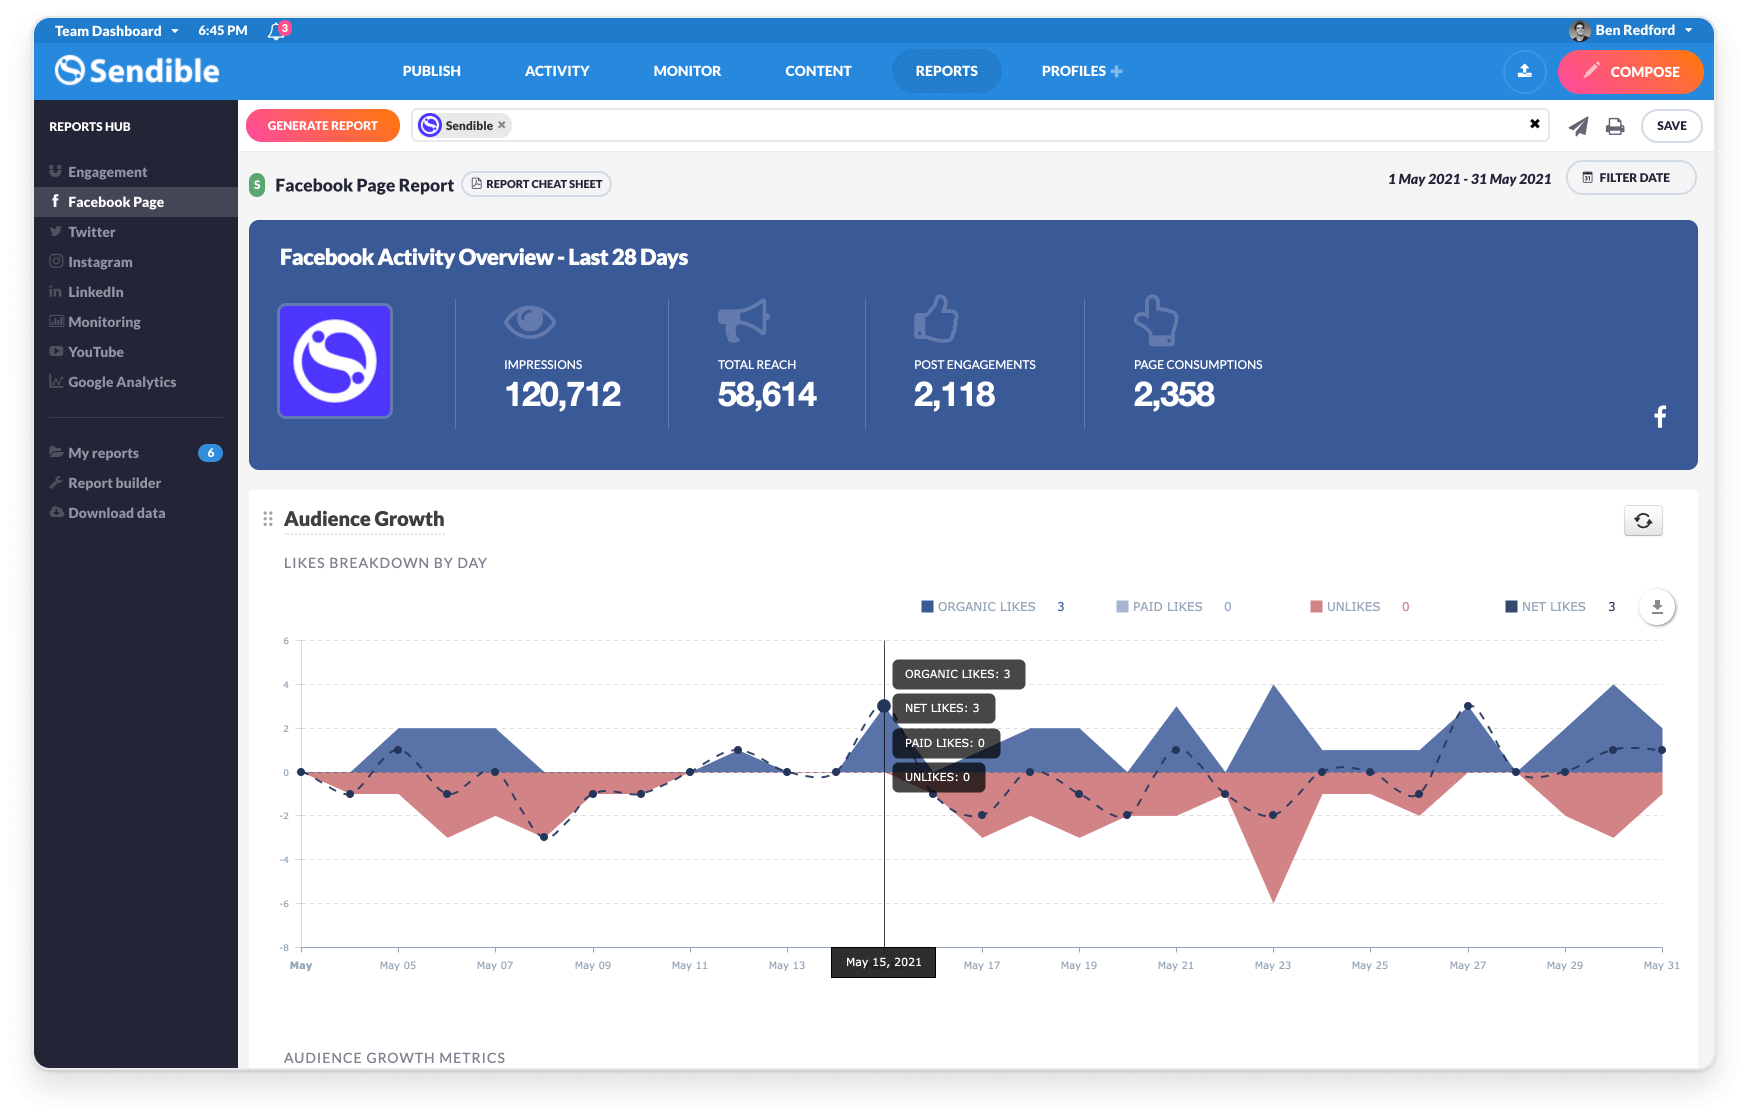 Generate in-depth reports for Facebook, Twitter, Instagram, LinkedIn and more. Our Reports Hub gives you ready-to-go social media reports for an instant snapshot of your social data.